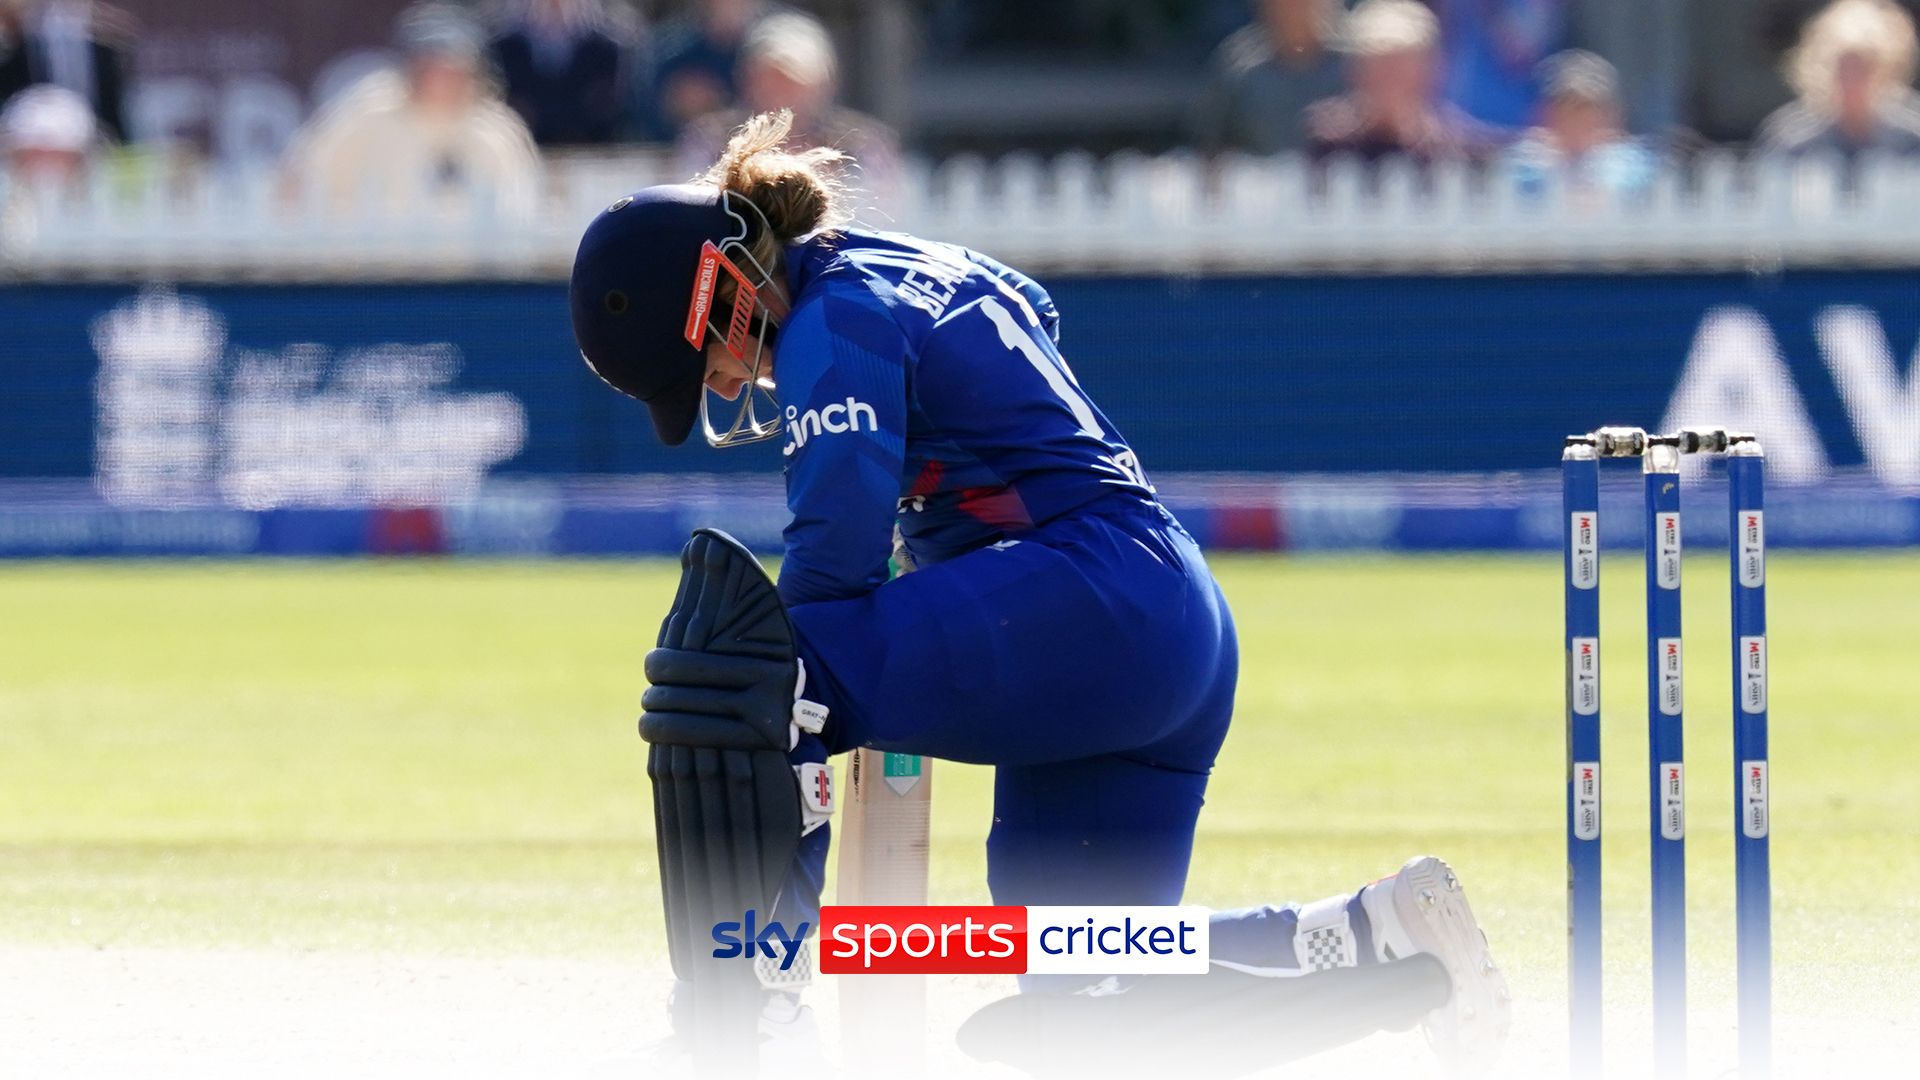 Beaumont gone! | Could key wicket derail England's chase?